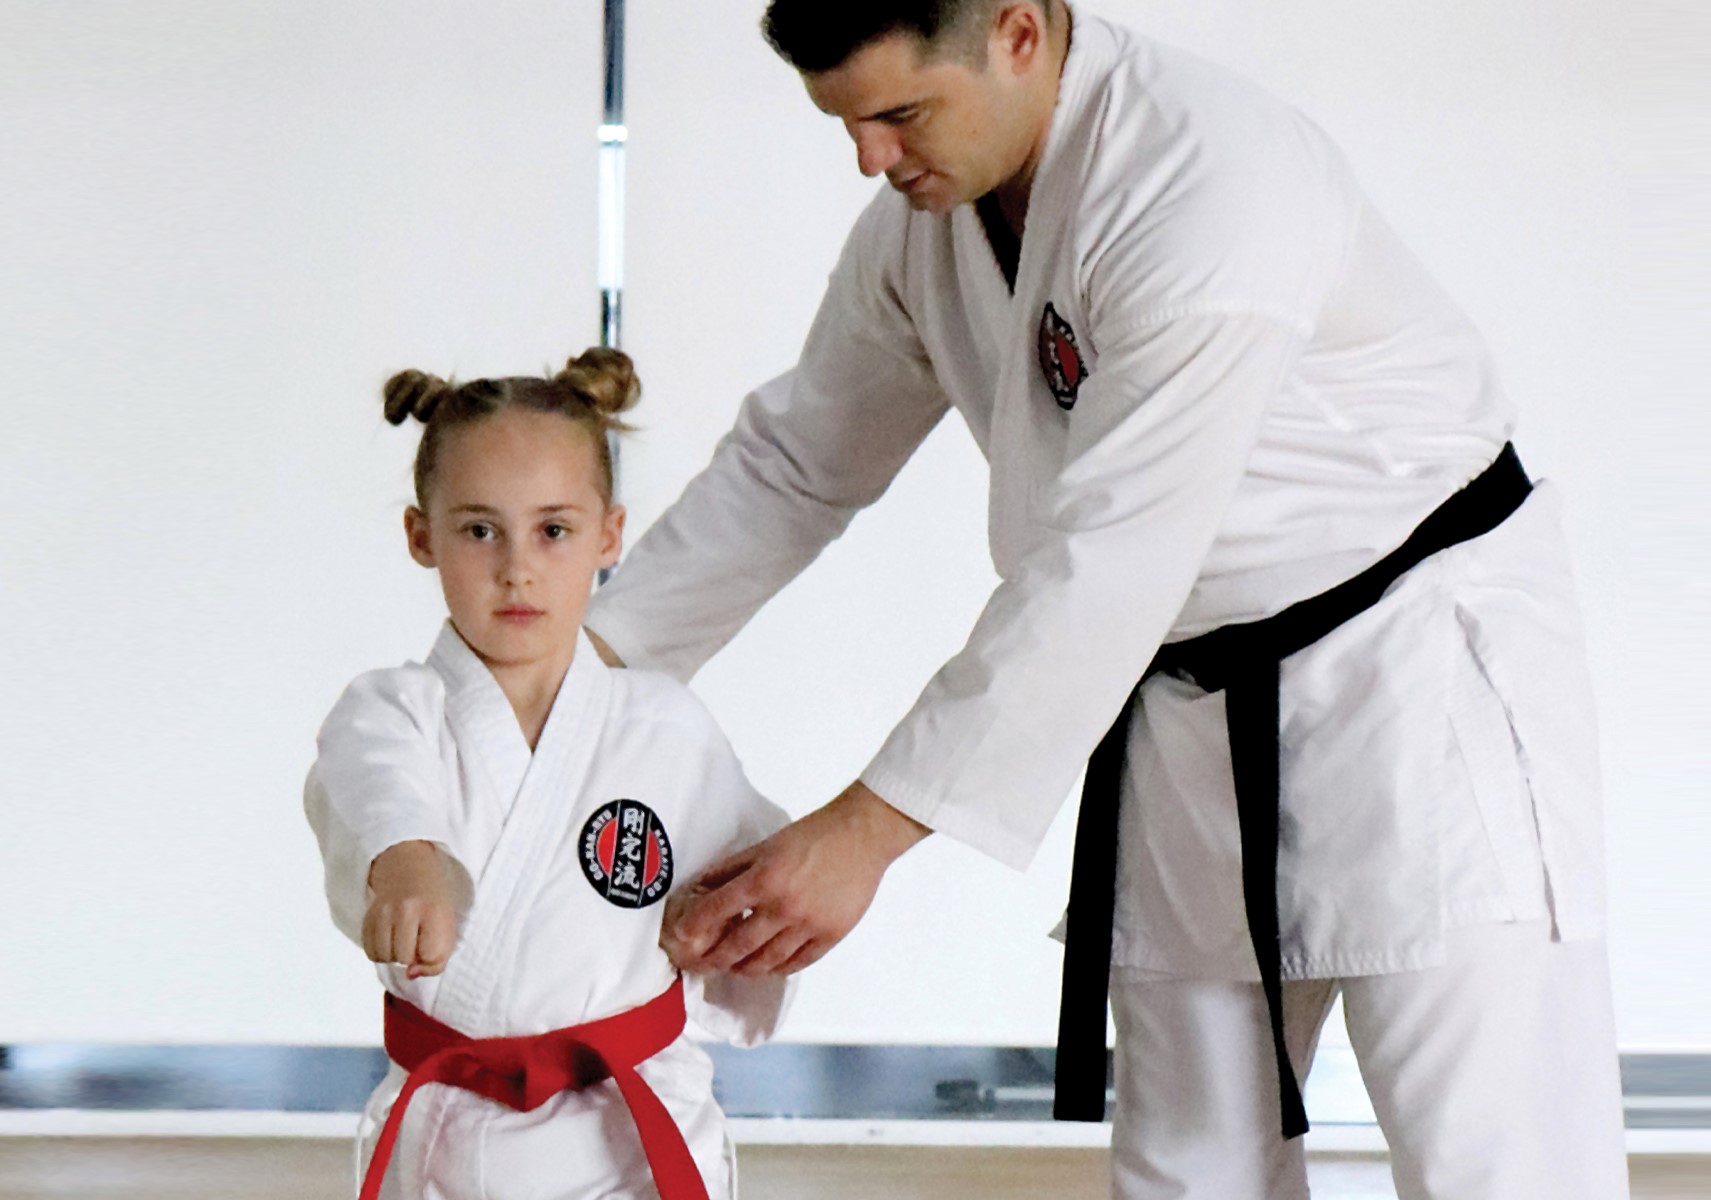 Train with GKR Karate and pay by Direct Debit.